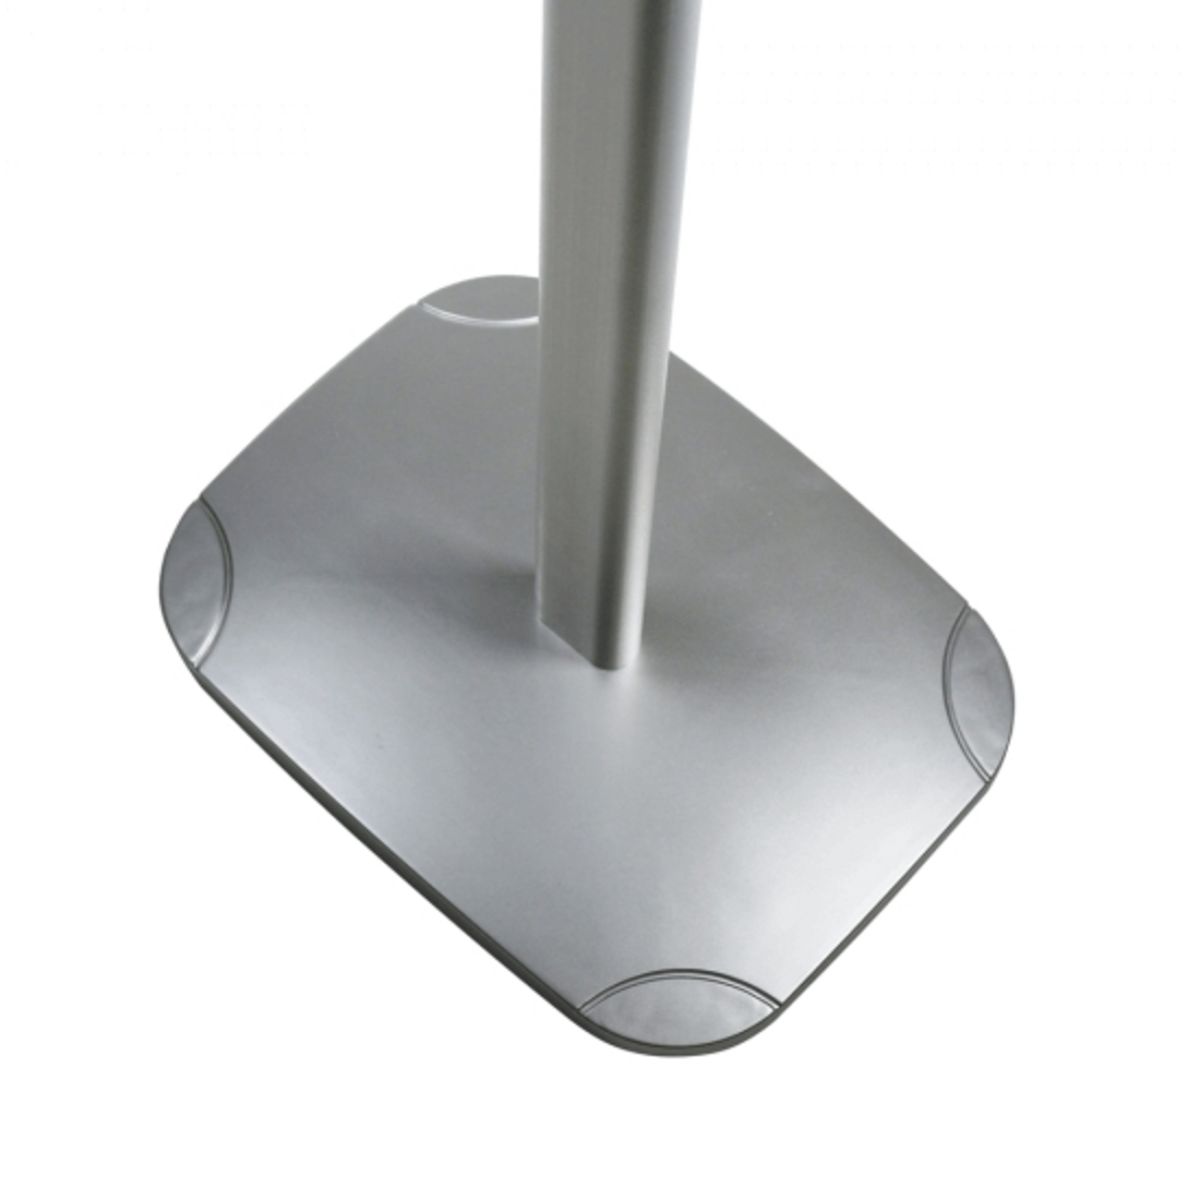 Free Standing A4 Brochure Holder with Header.png